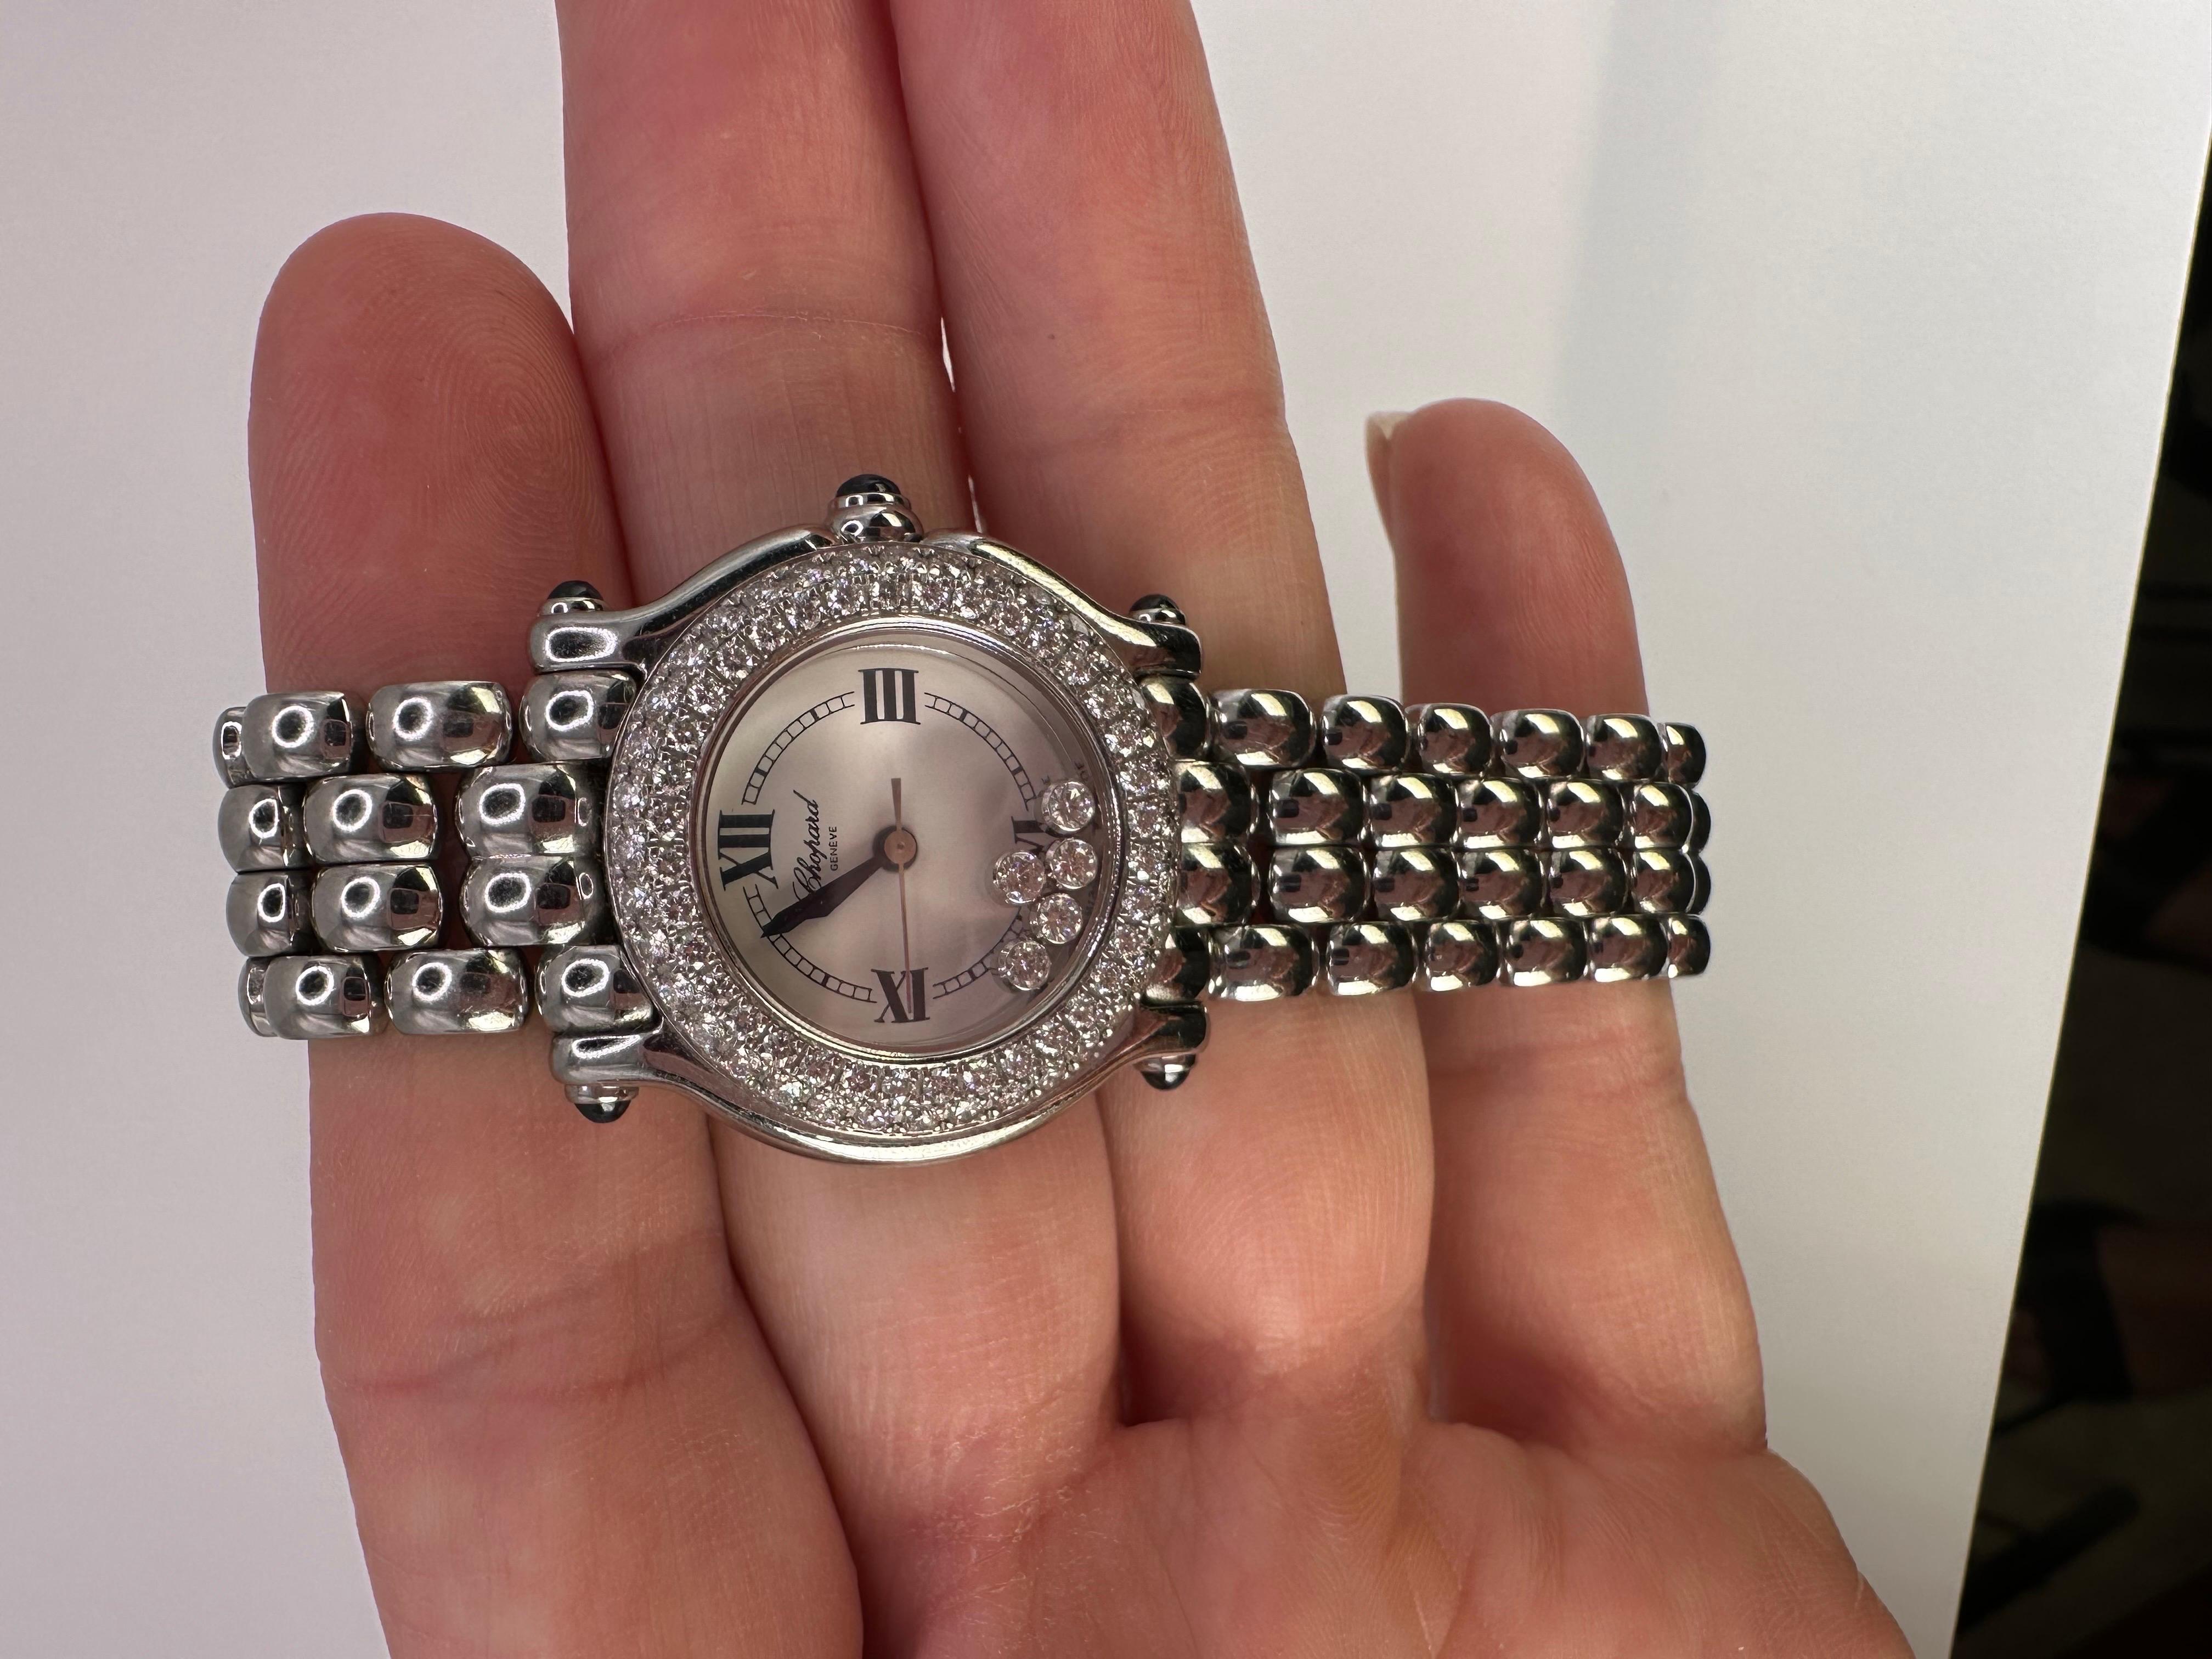 Beautiful Chopard Happy Sport watch with 5 diamond on dial as well as pave set diamonds around the dial on the case, original by Cartier. Authentic Chopard watch!
Details: 27/8294-23
Model 832164. 8245
Metal: stainless steel
Item #